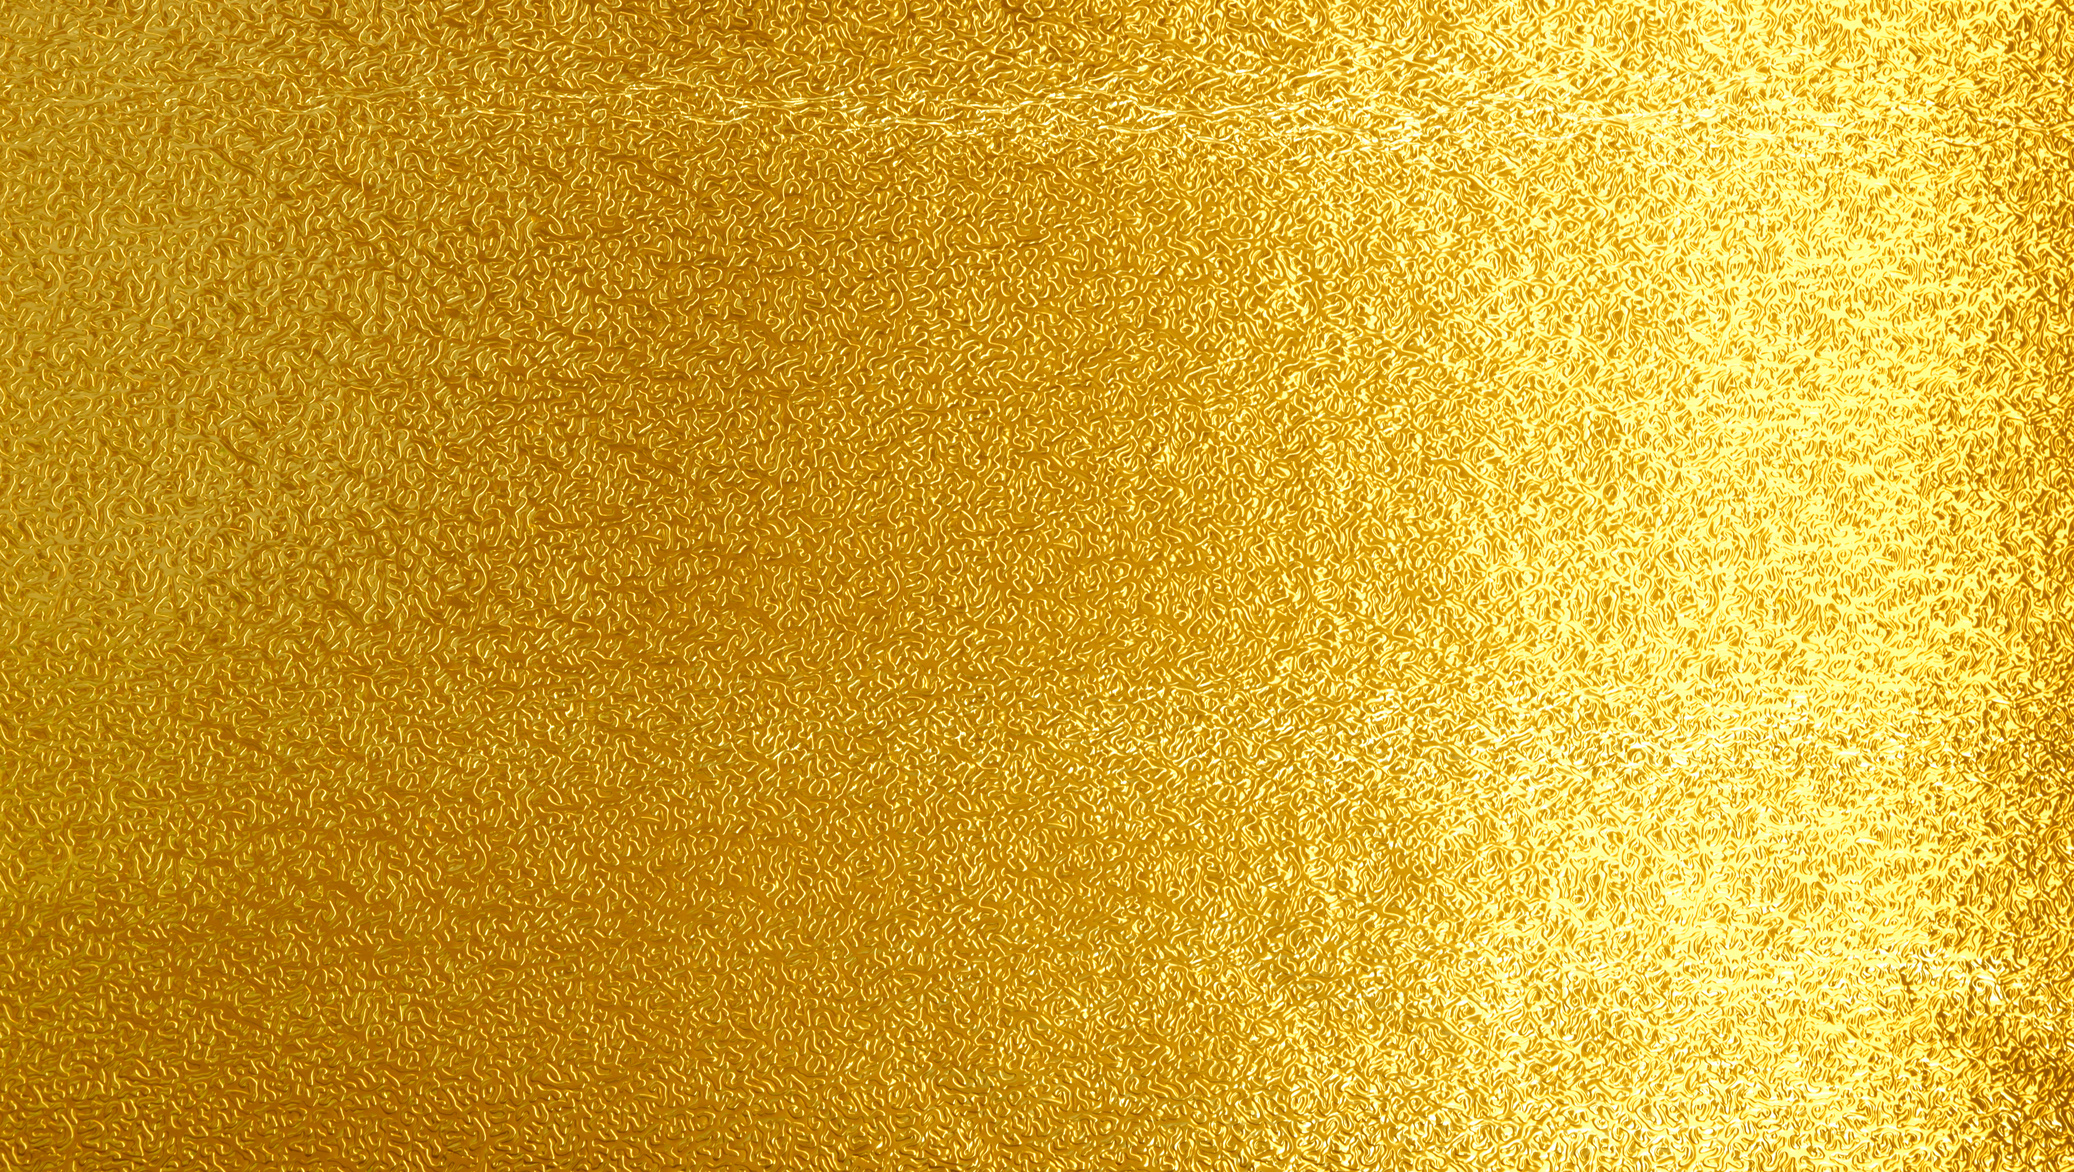 Shiny yellow leaf gold texture